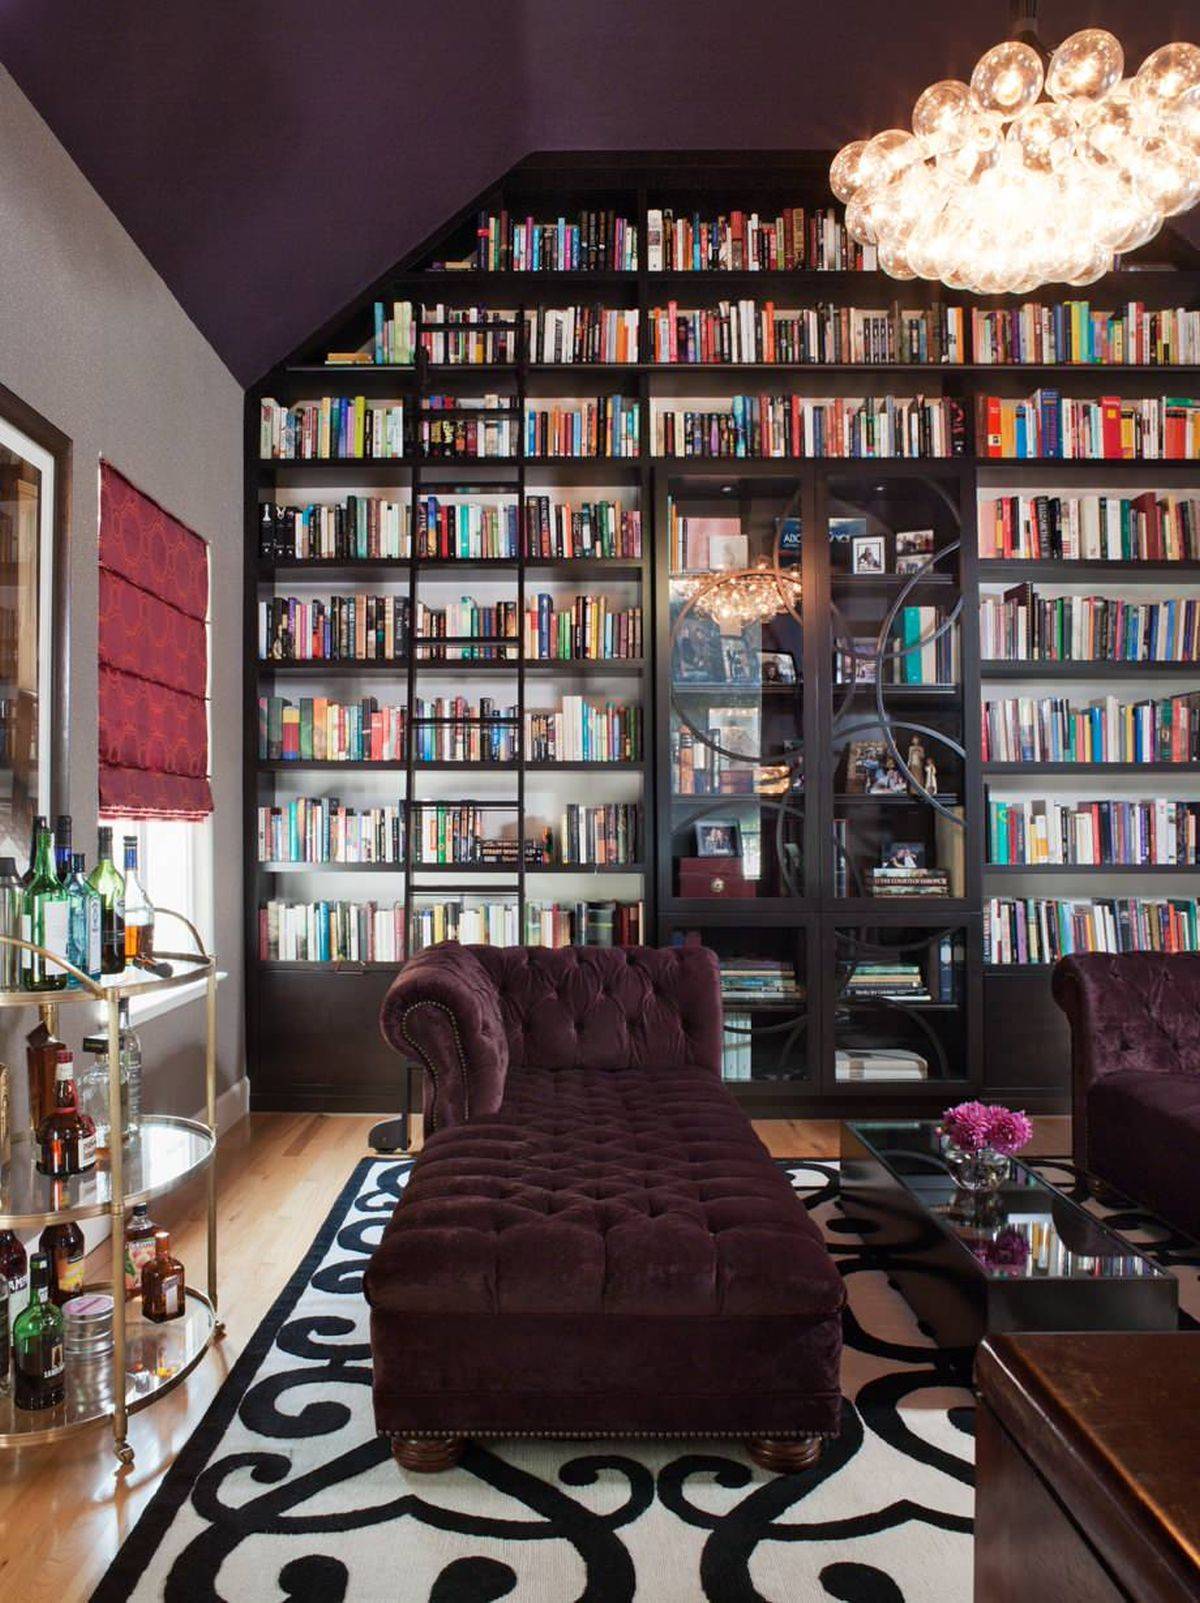 Luxurious-modern-family-room-built-for-a-family-of-bibliophiles-91573